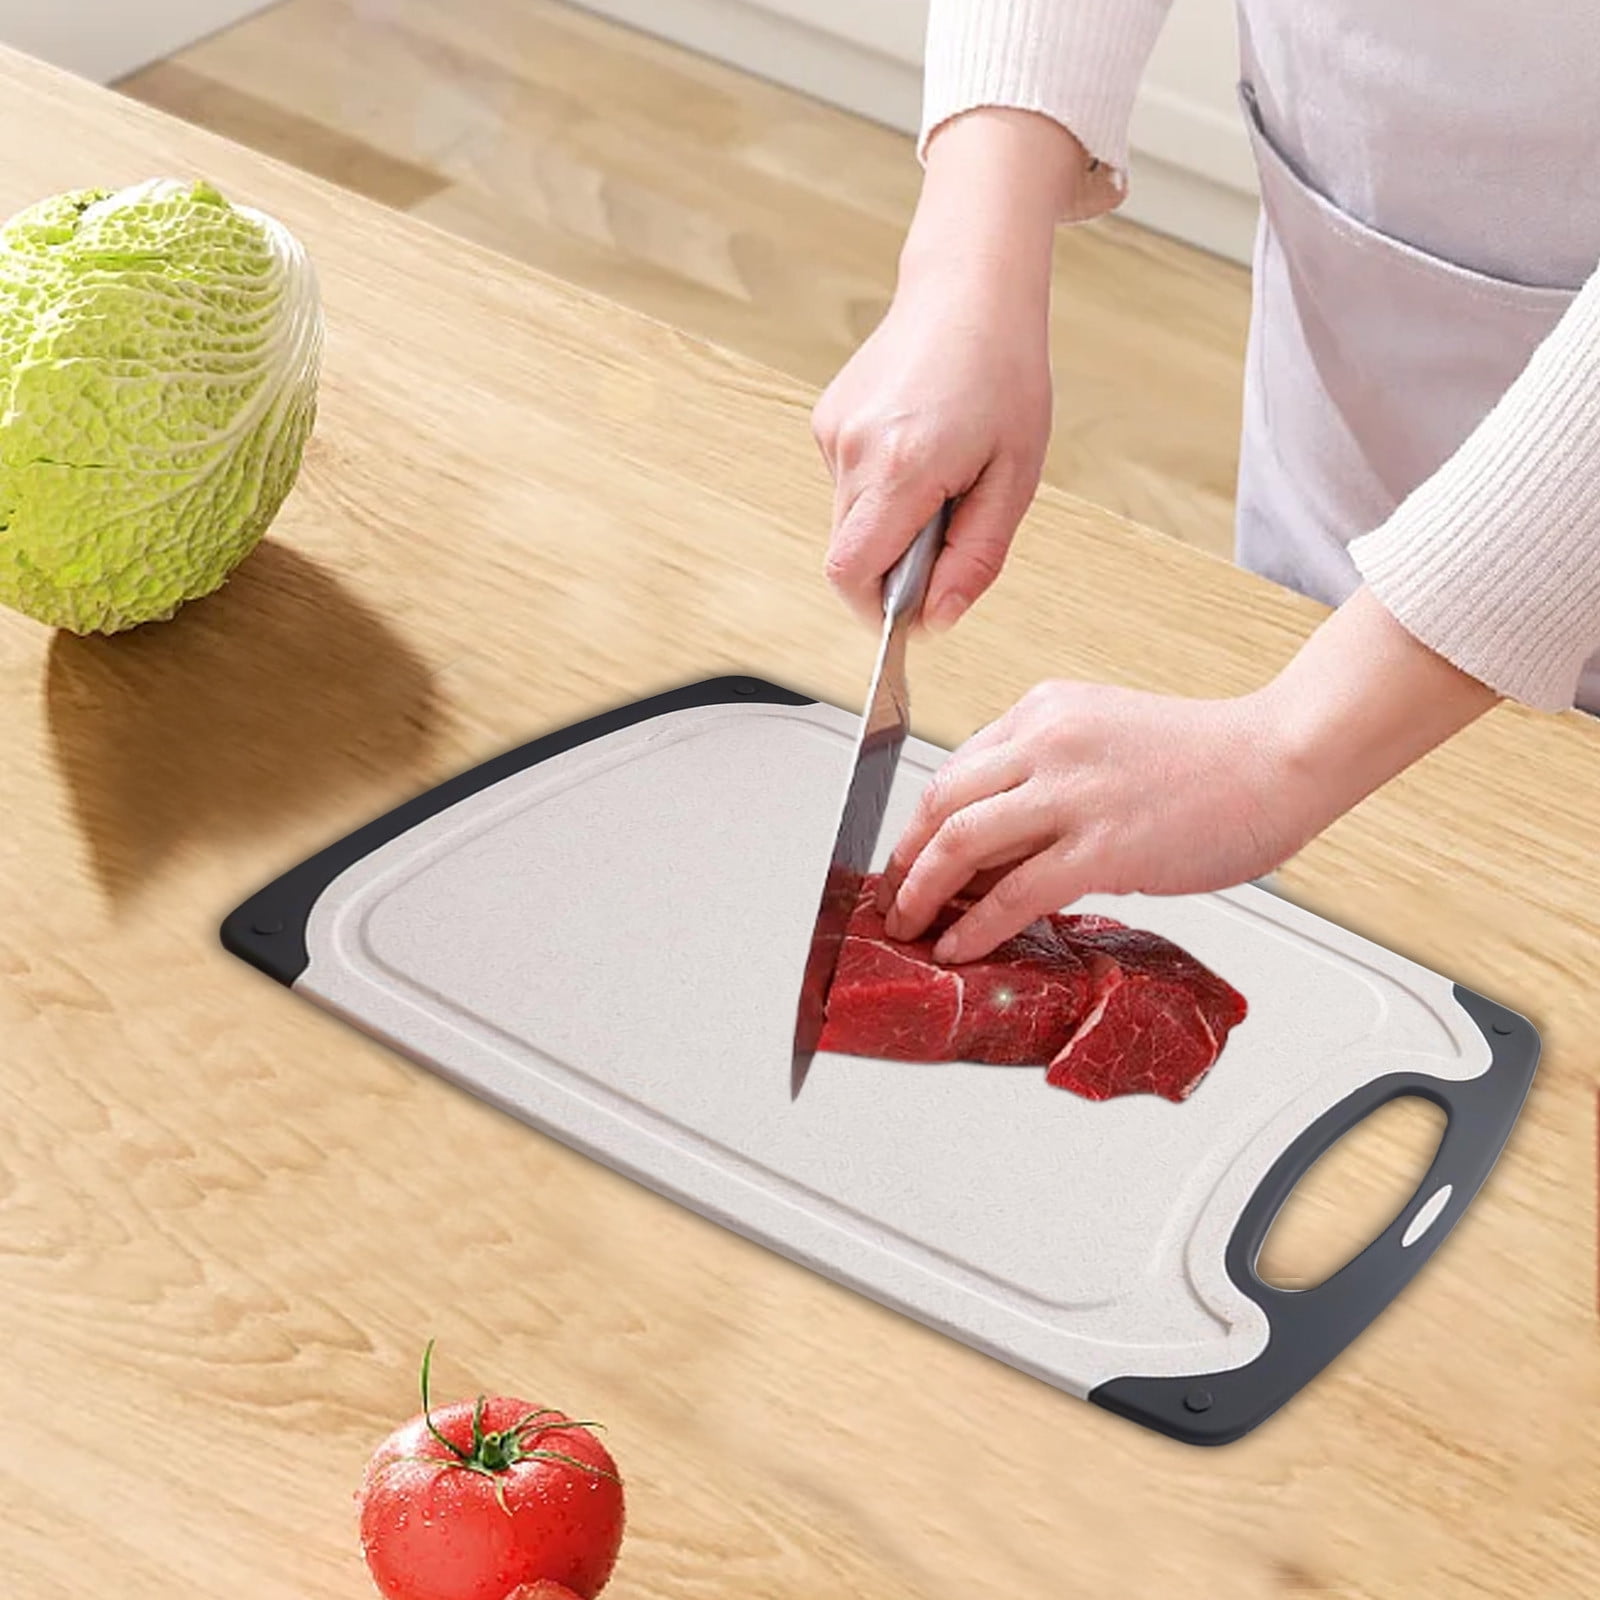 Plastic Cutting Board, 3 Pieces Dishwasher Safe Cutting Boards with Juice Grooves, Easy Grip Handle, Non-Slip, with Grinding Area for Grinding